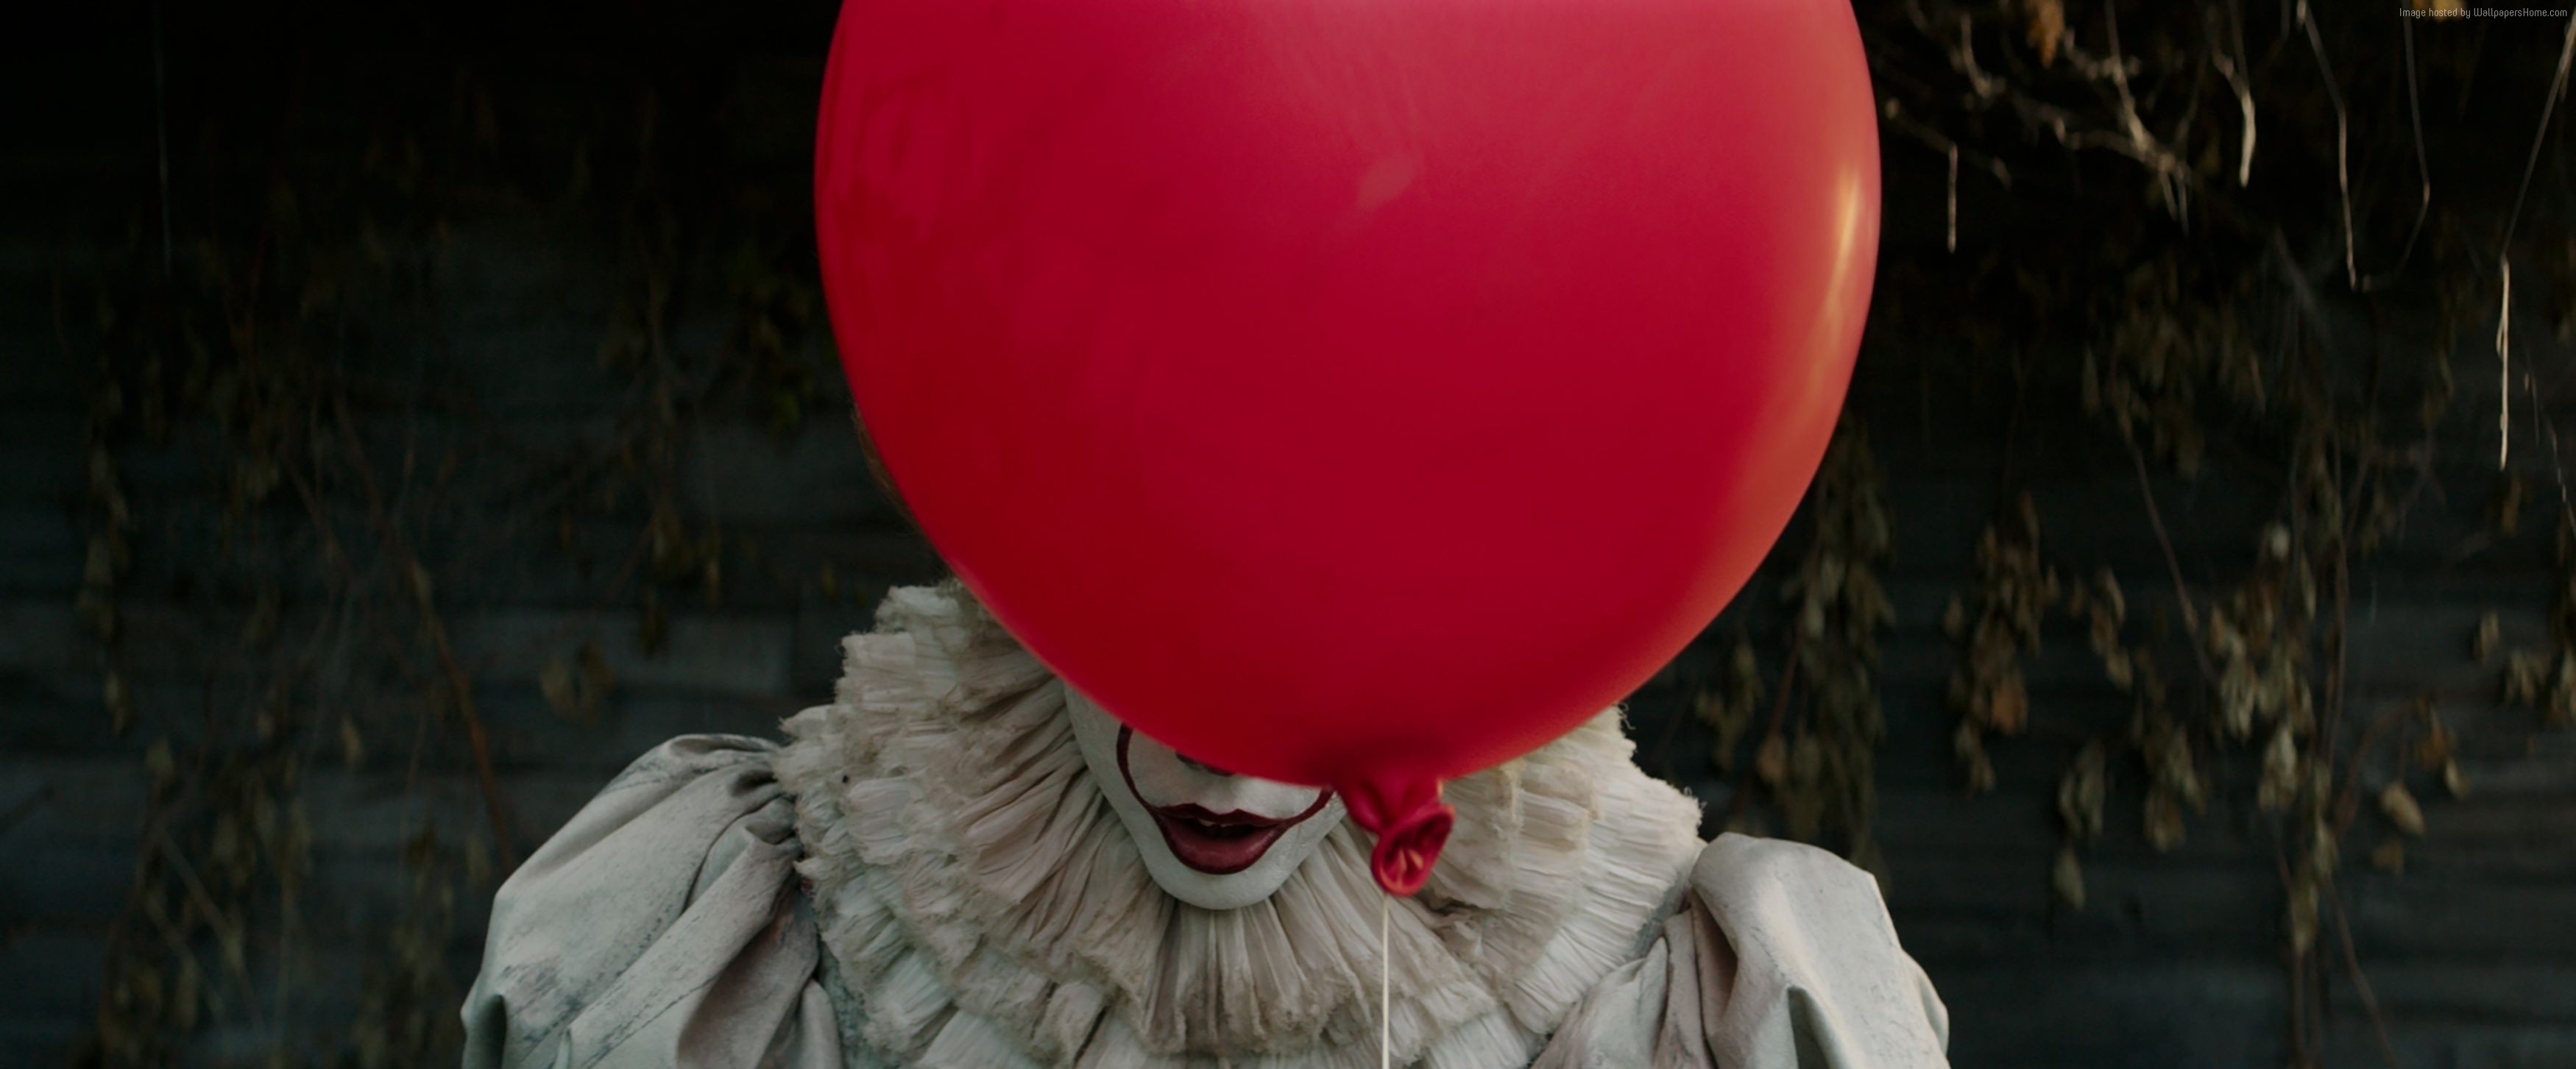 3500x1453 Title : wallpaper it, pennywise, balloon, clown, best movies, movies  #13325. Dimension : 3500 x 1453. File Type : JPG/JPEG